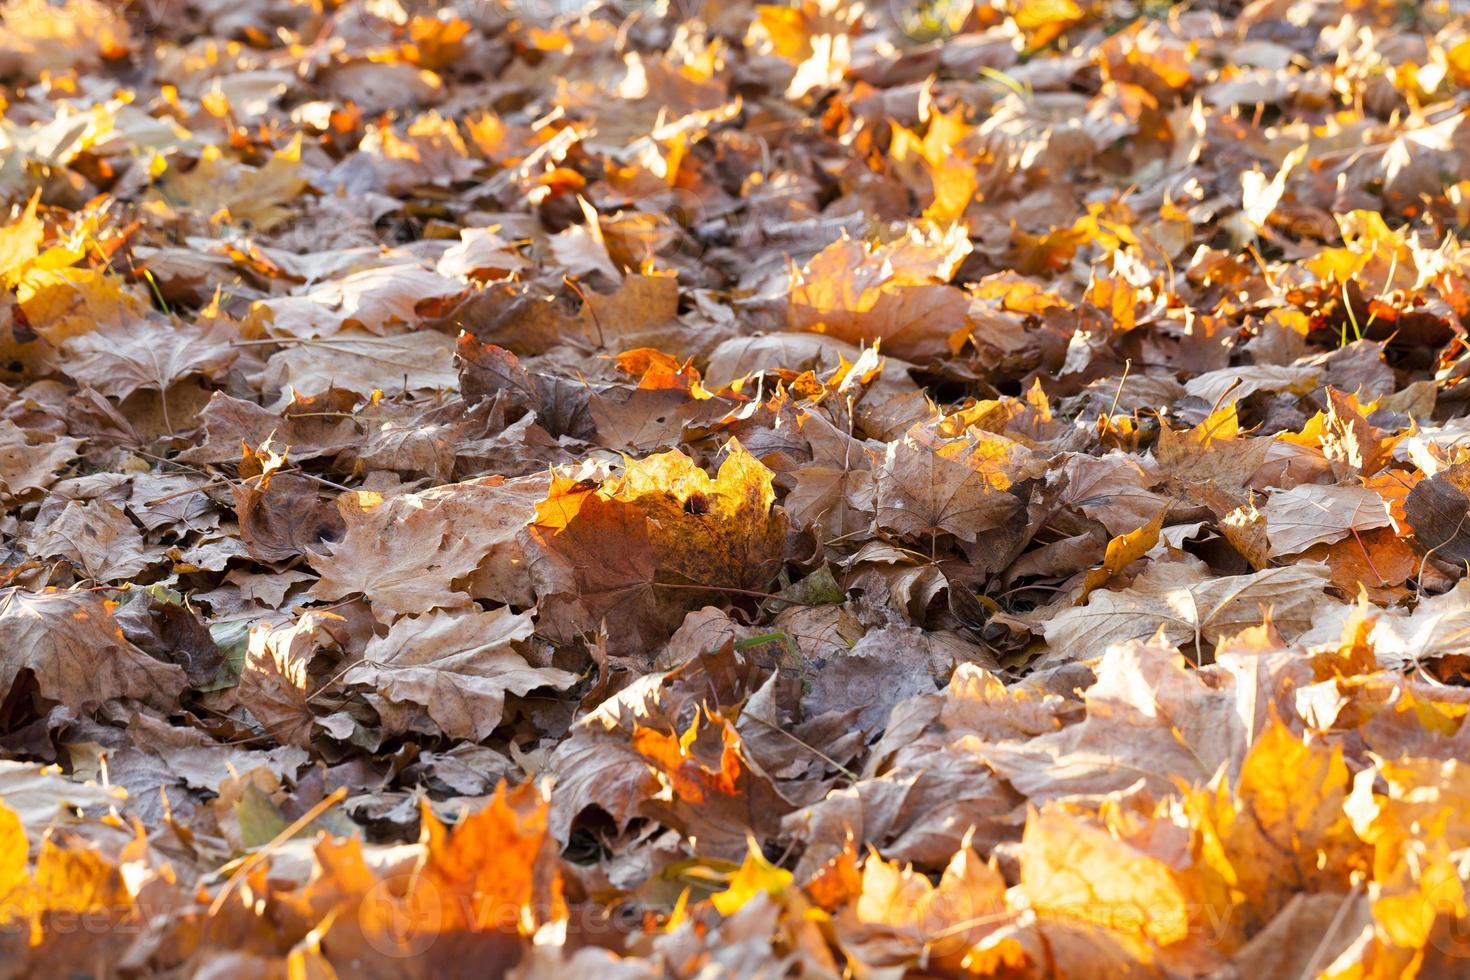 fallen leaves of a maple photo